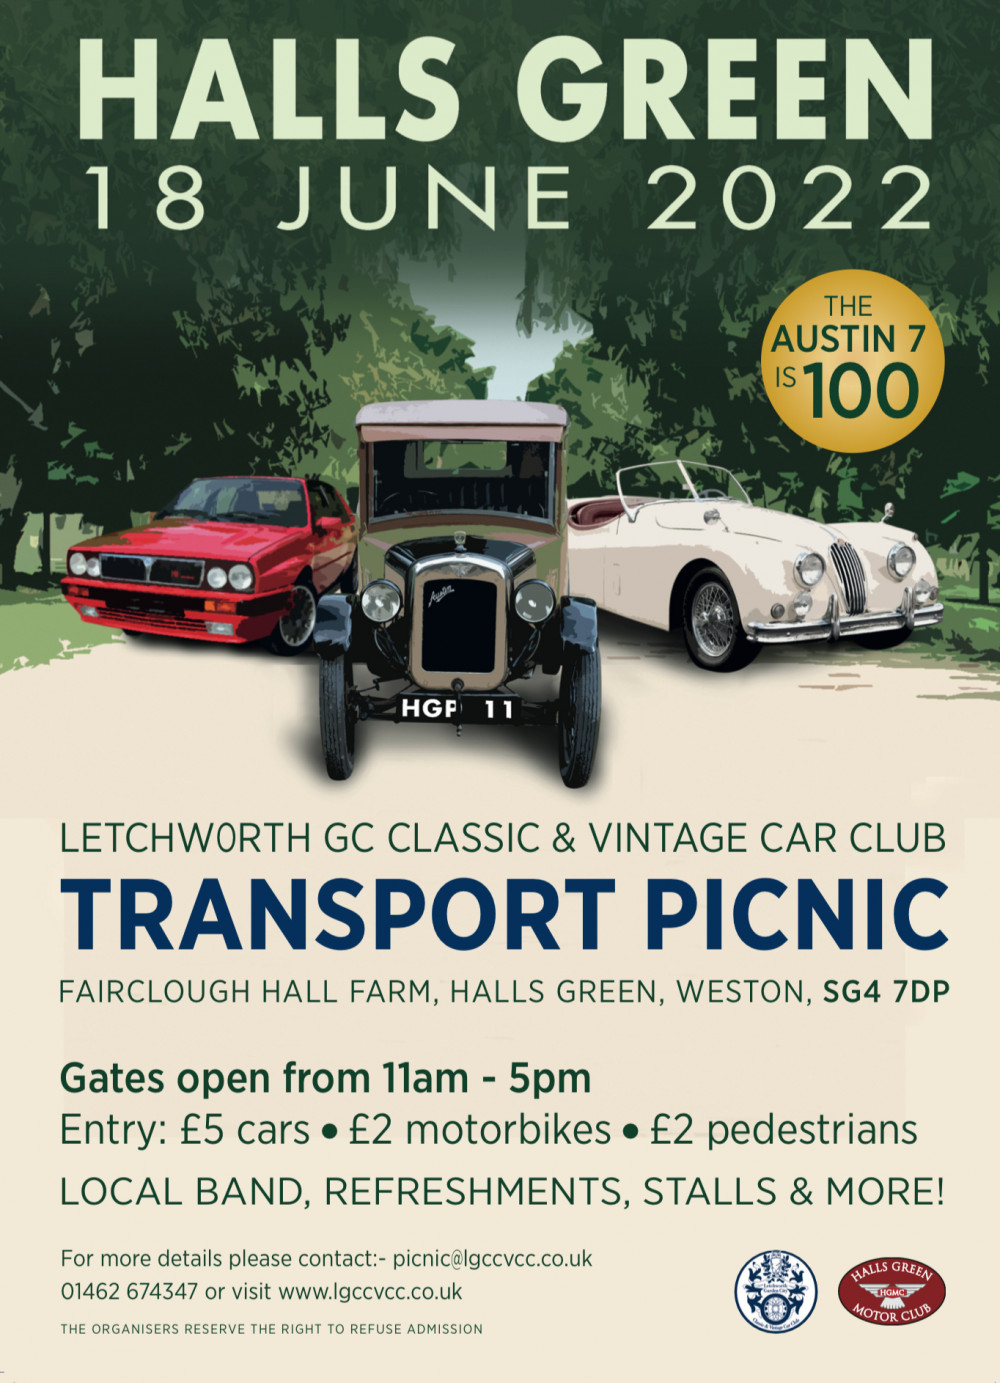 The Transport Picnic at Letchworth Garden City Classic and Vintage Car Club - find out more 